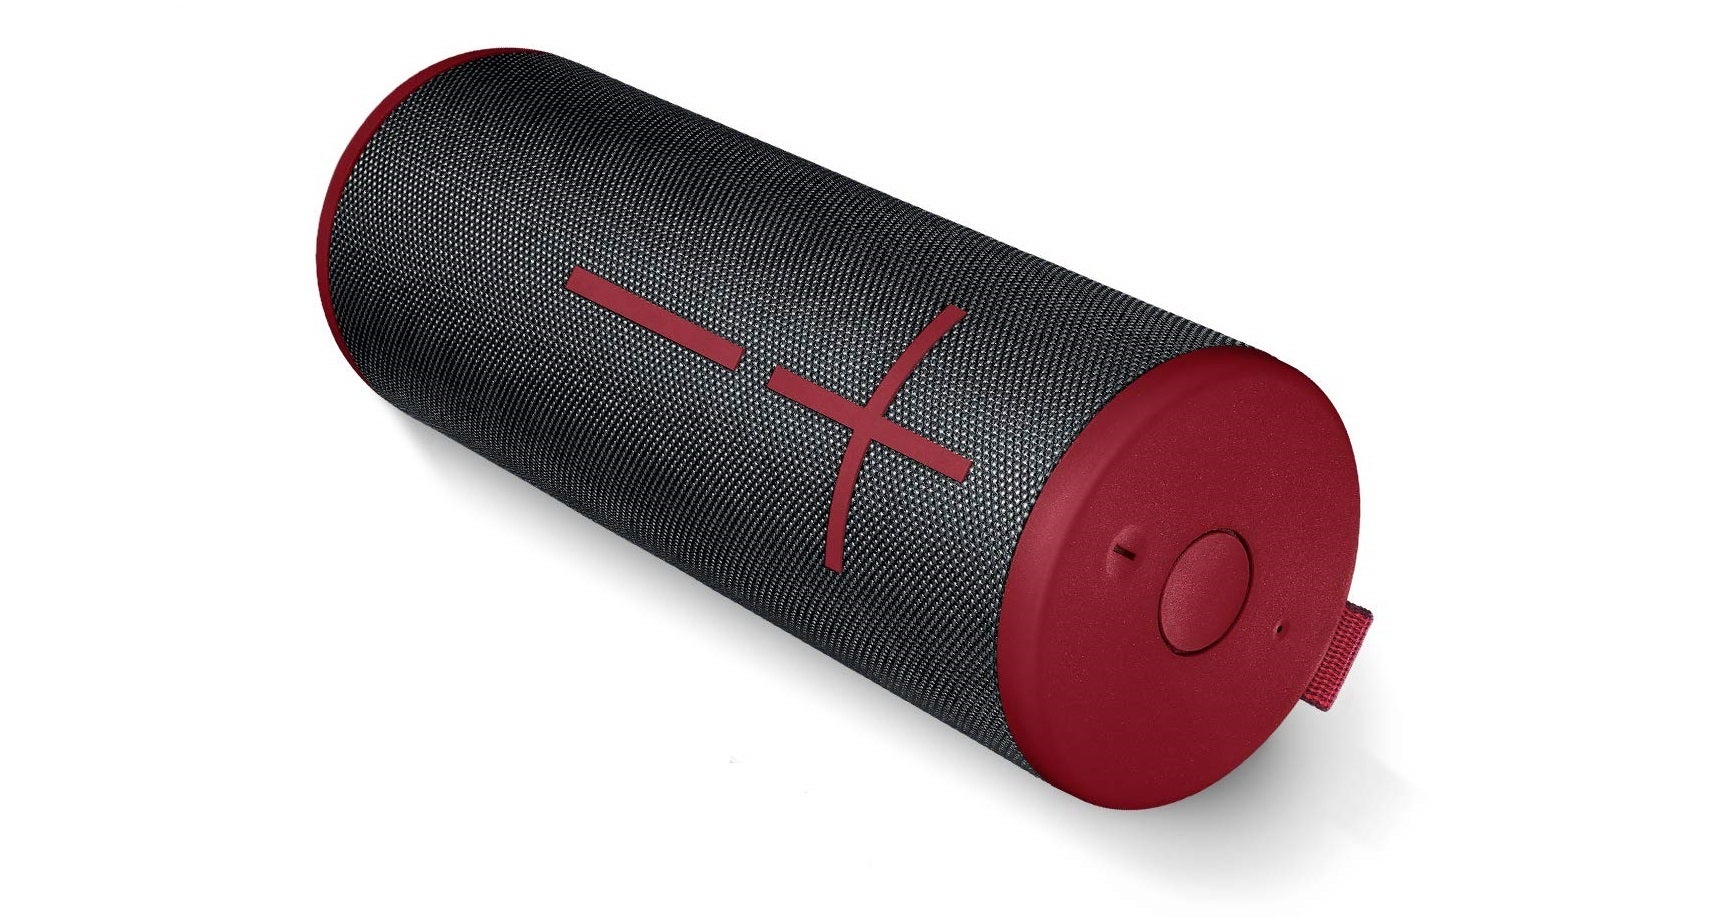 The best portable Bluetooth speakers in 2023